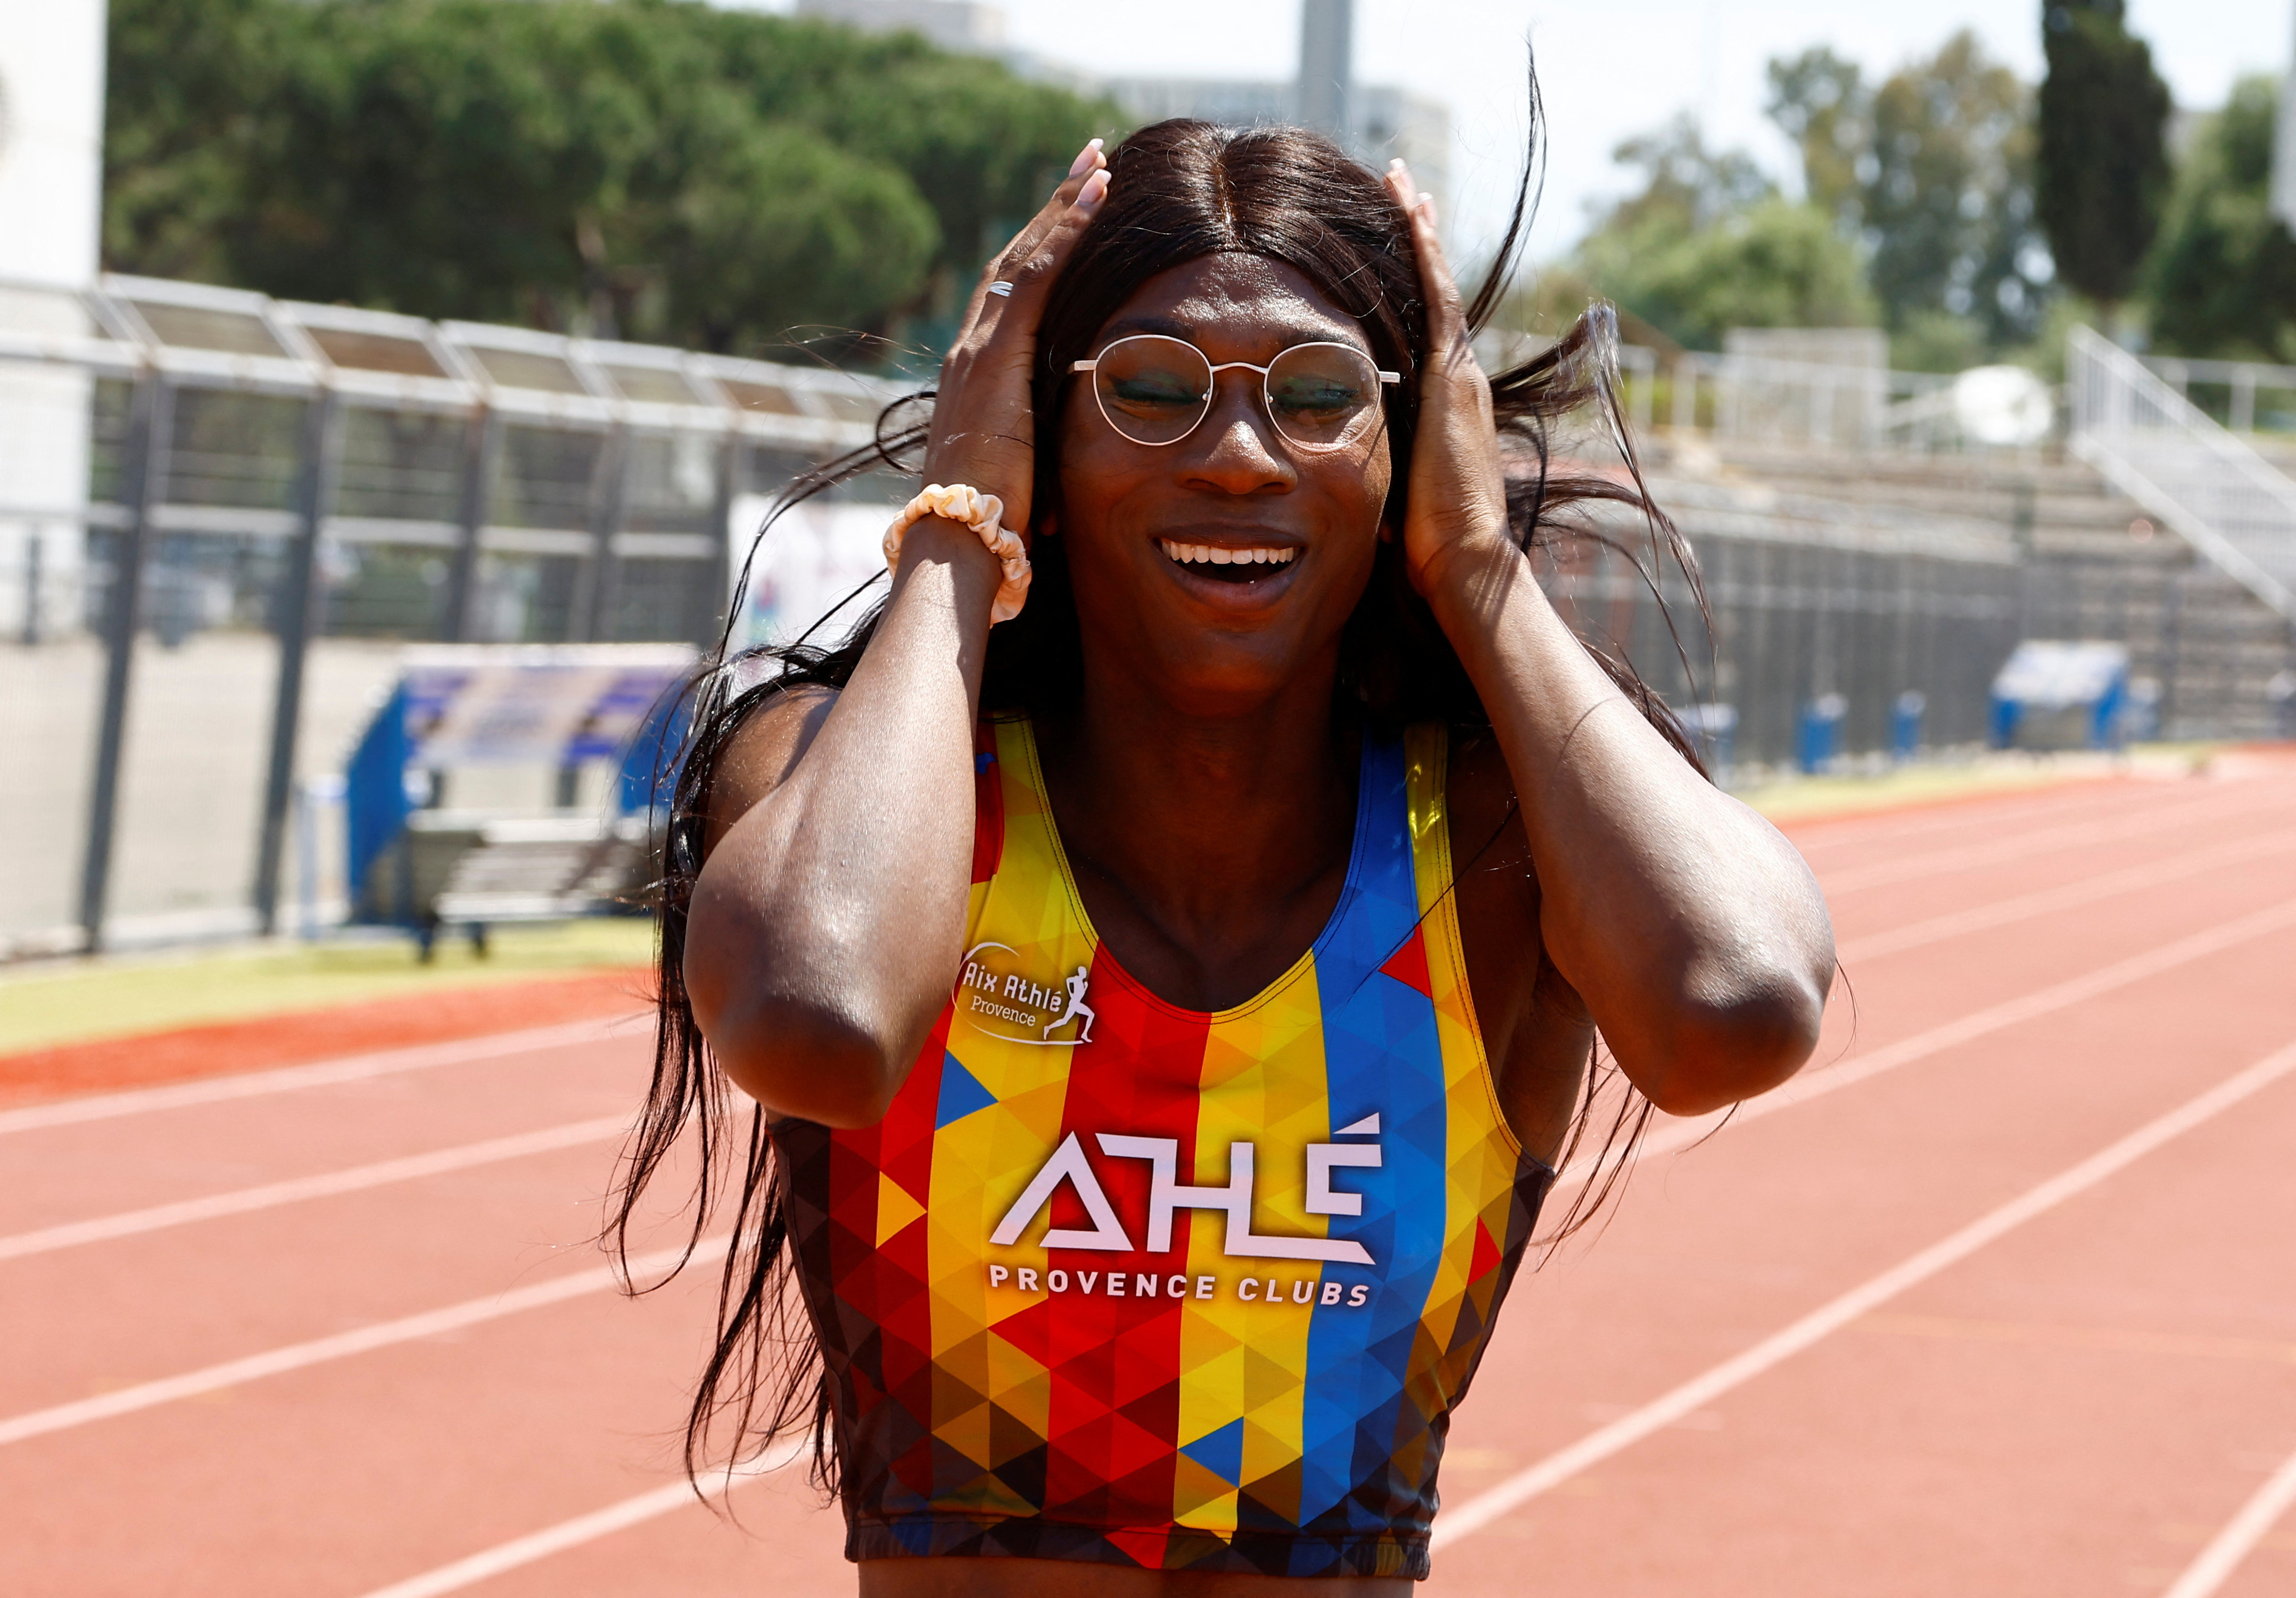 Trans runner barred from Olympics rips World Athletics' decision to  'maintain fairness' in women's sports